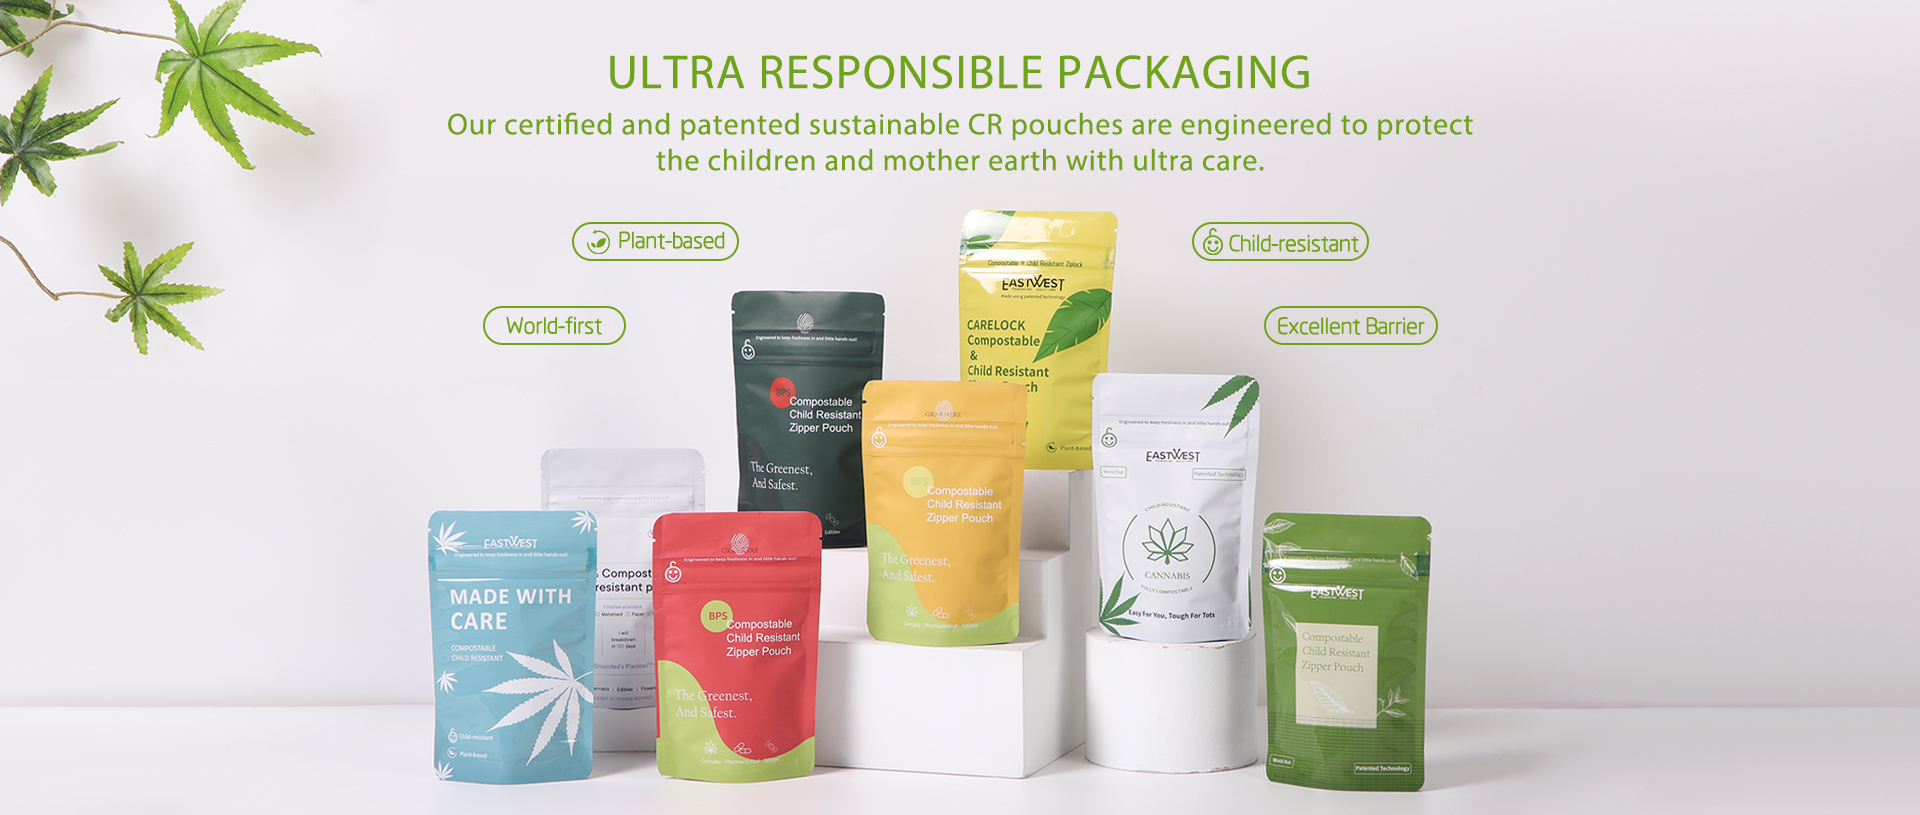 Ultra Responsible Sustaianble CR Packaging